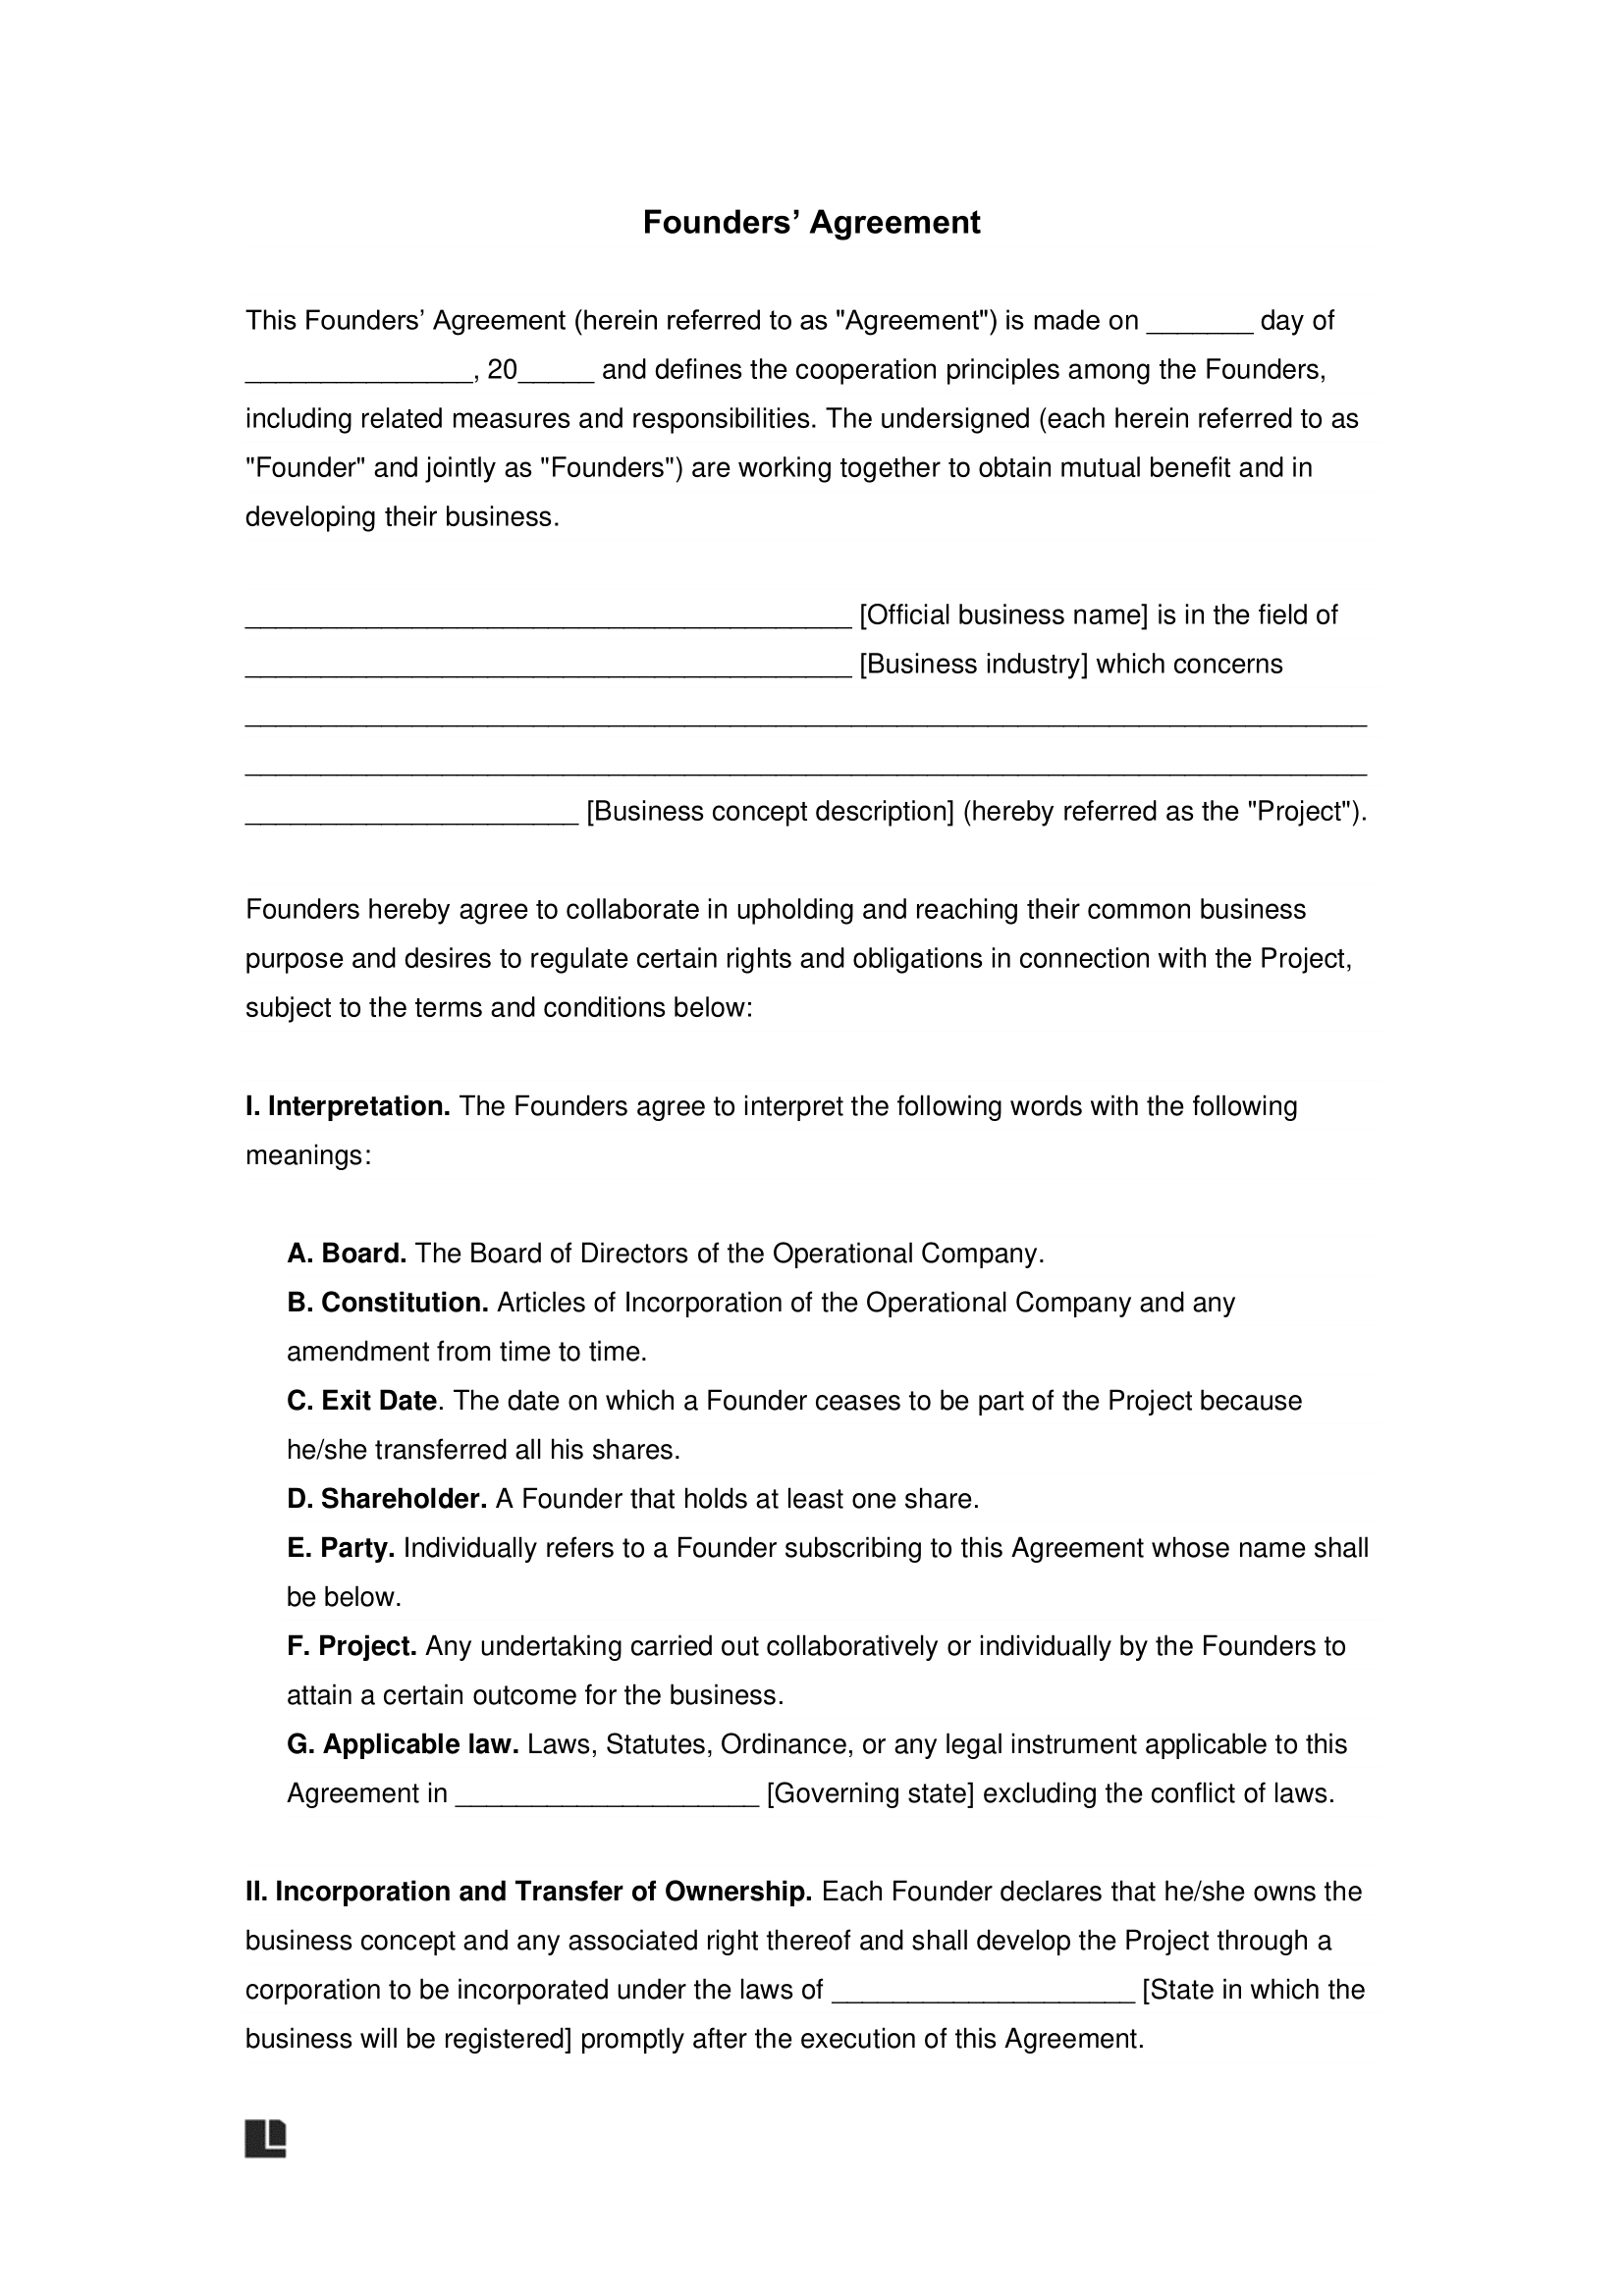 Free Founders' Agreement Template